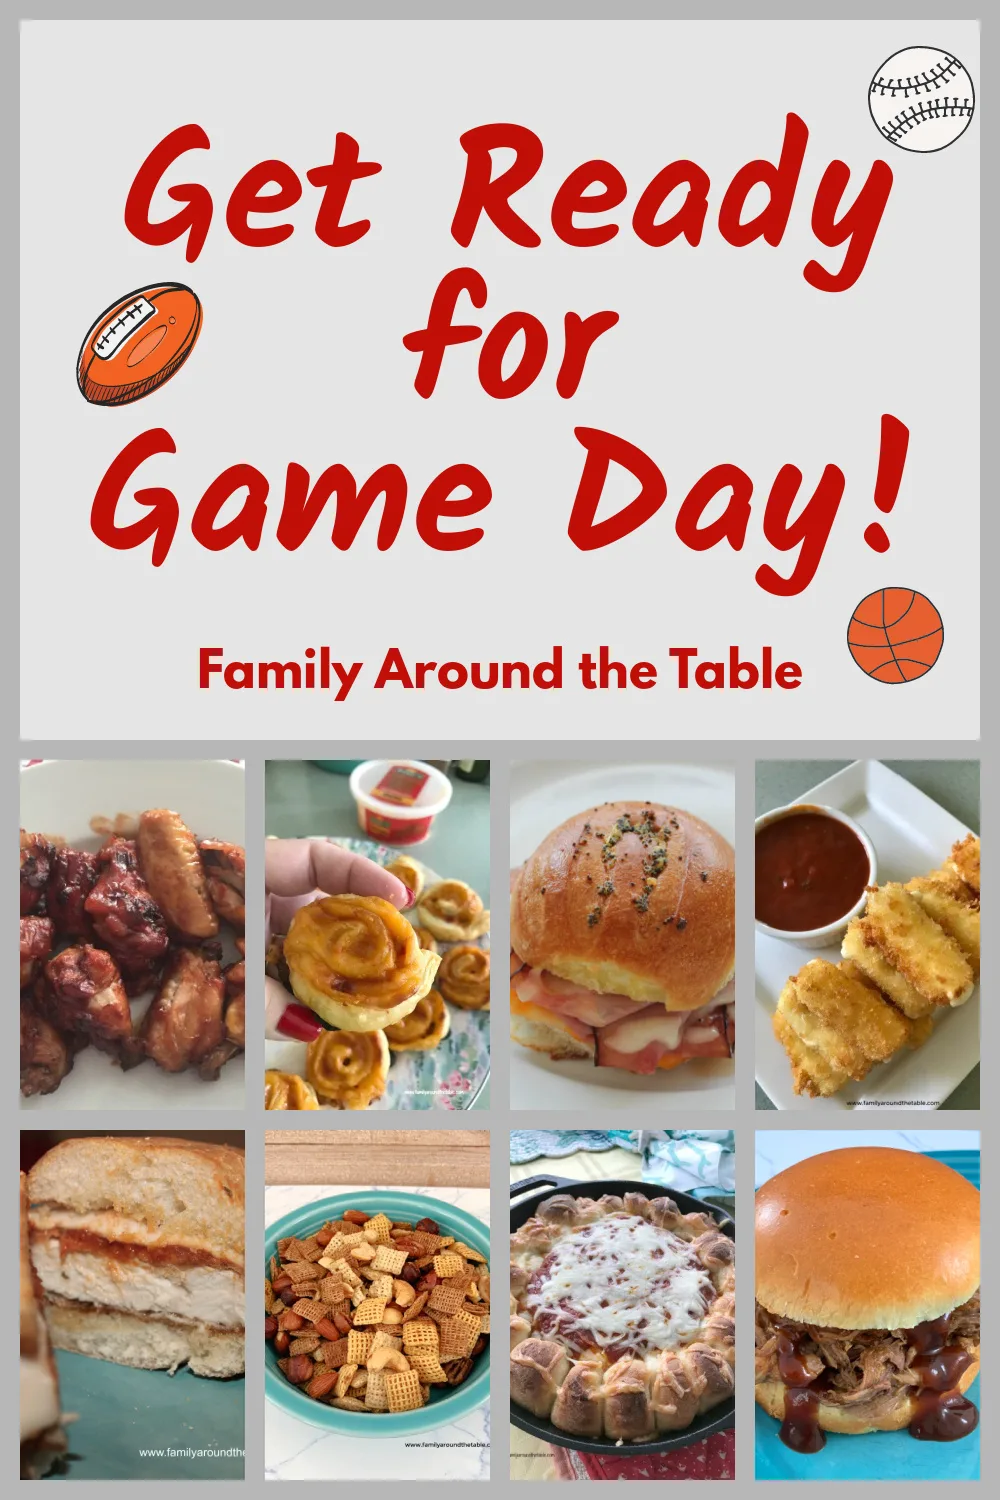 Game day recipes Pinterest image.